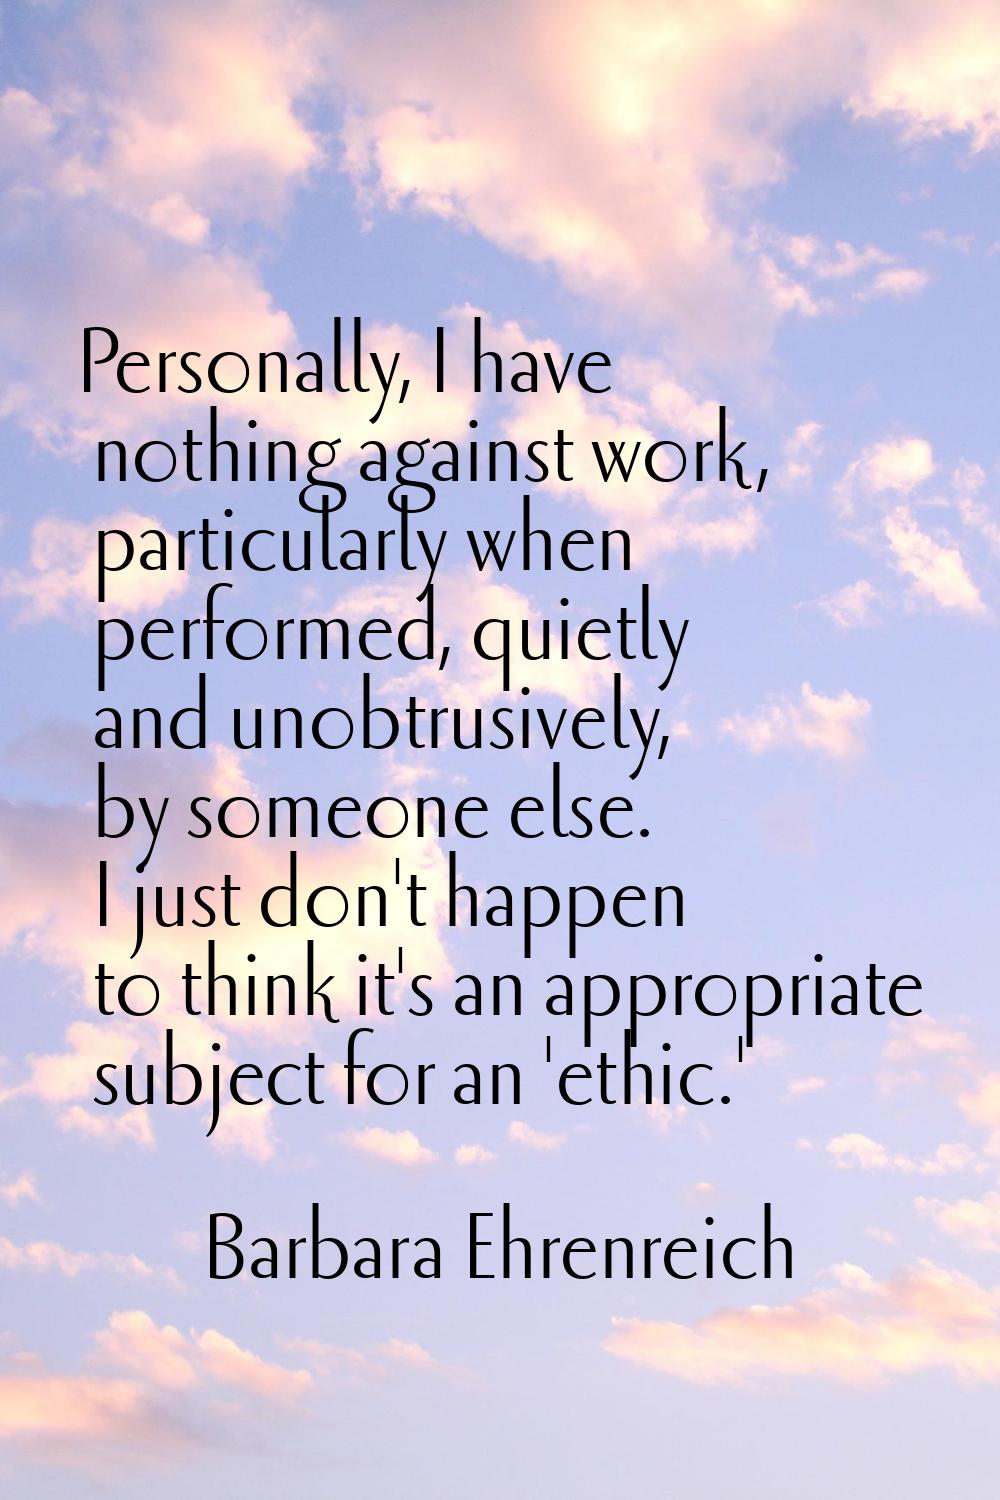 Personally, I have nothing against work, particularly when performed, quietly and unobtrusively, by